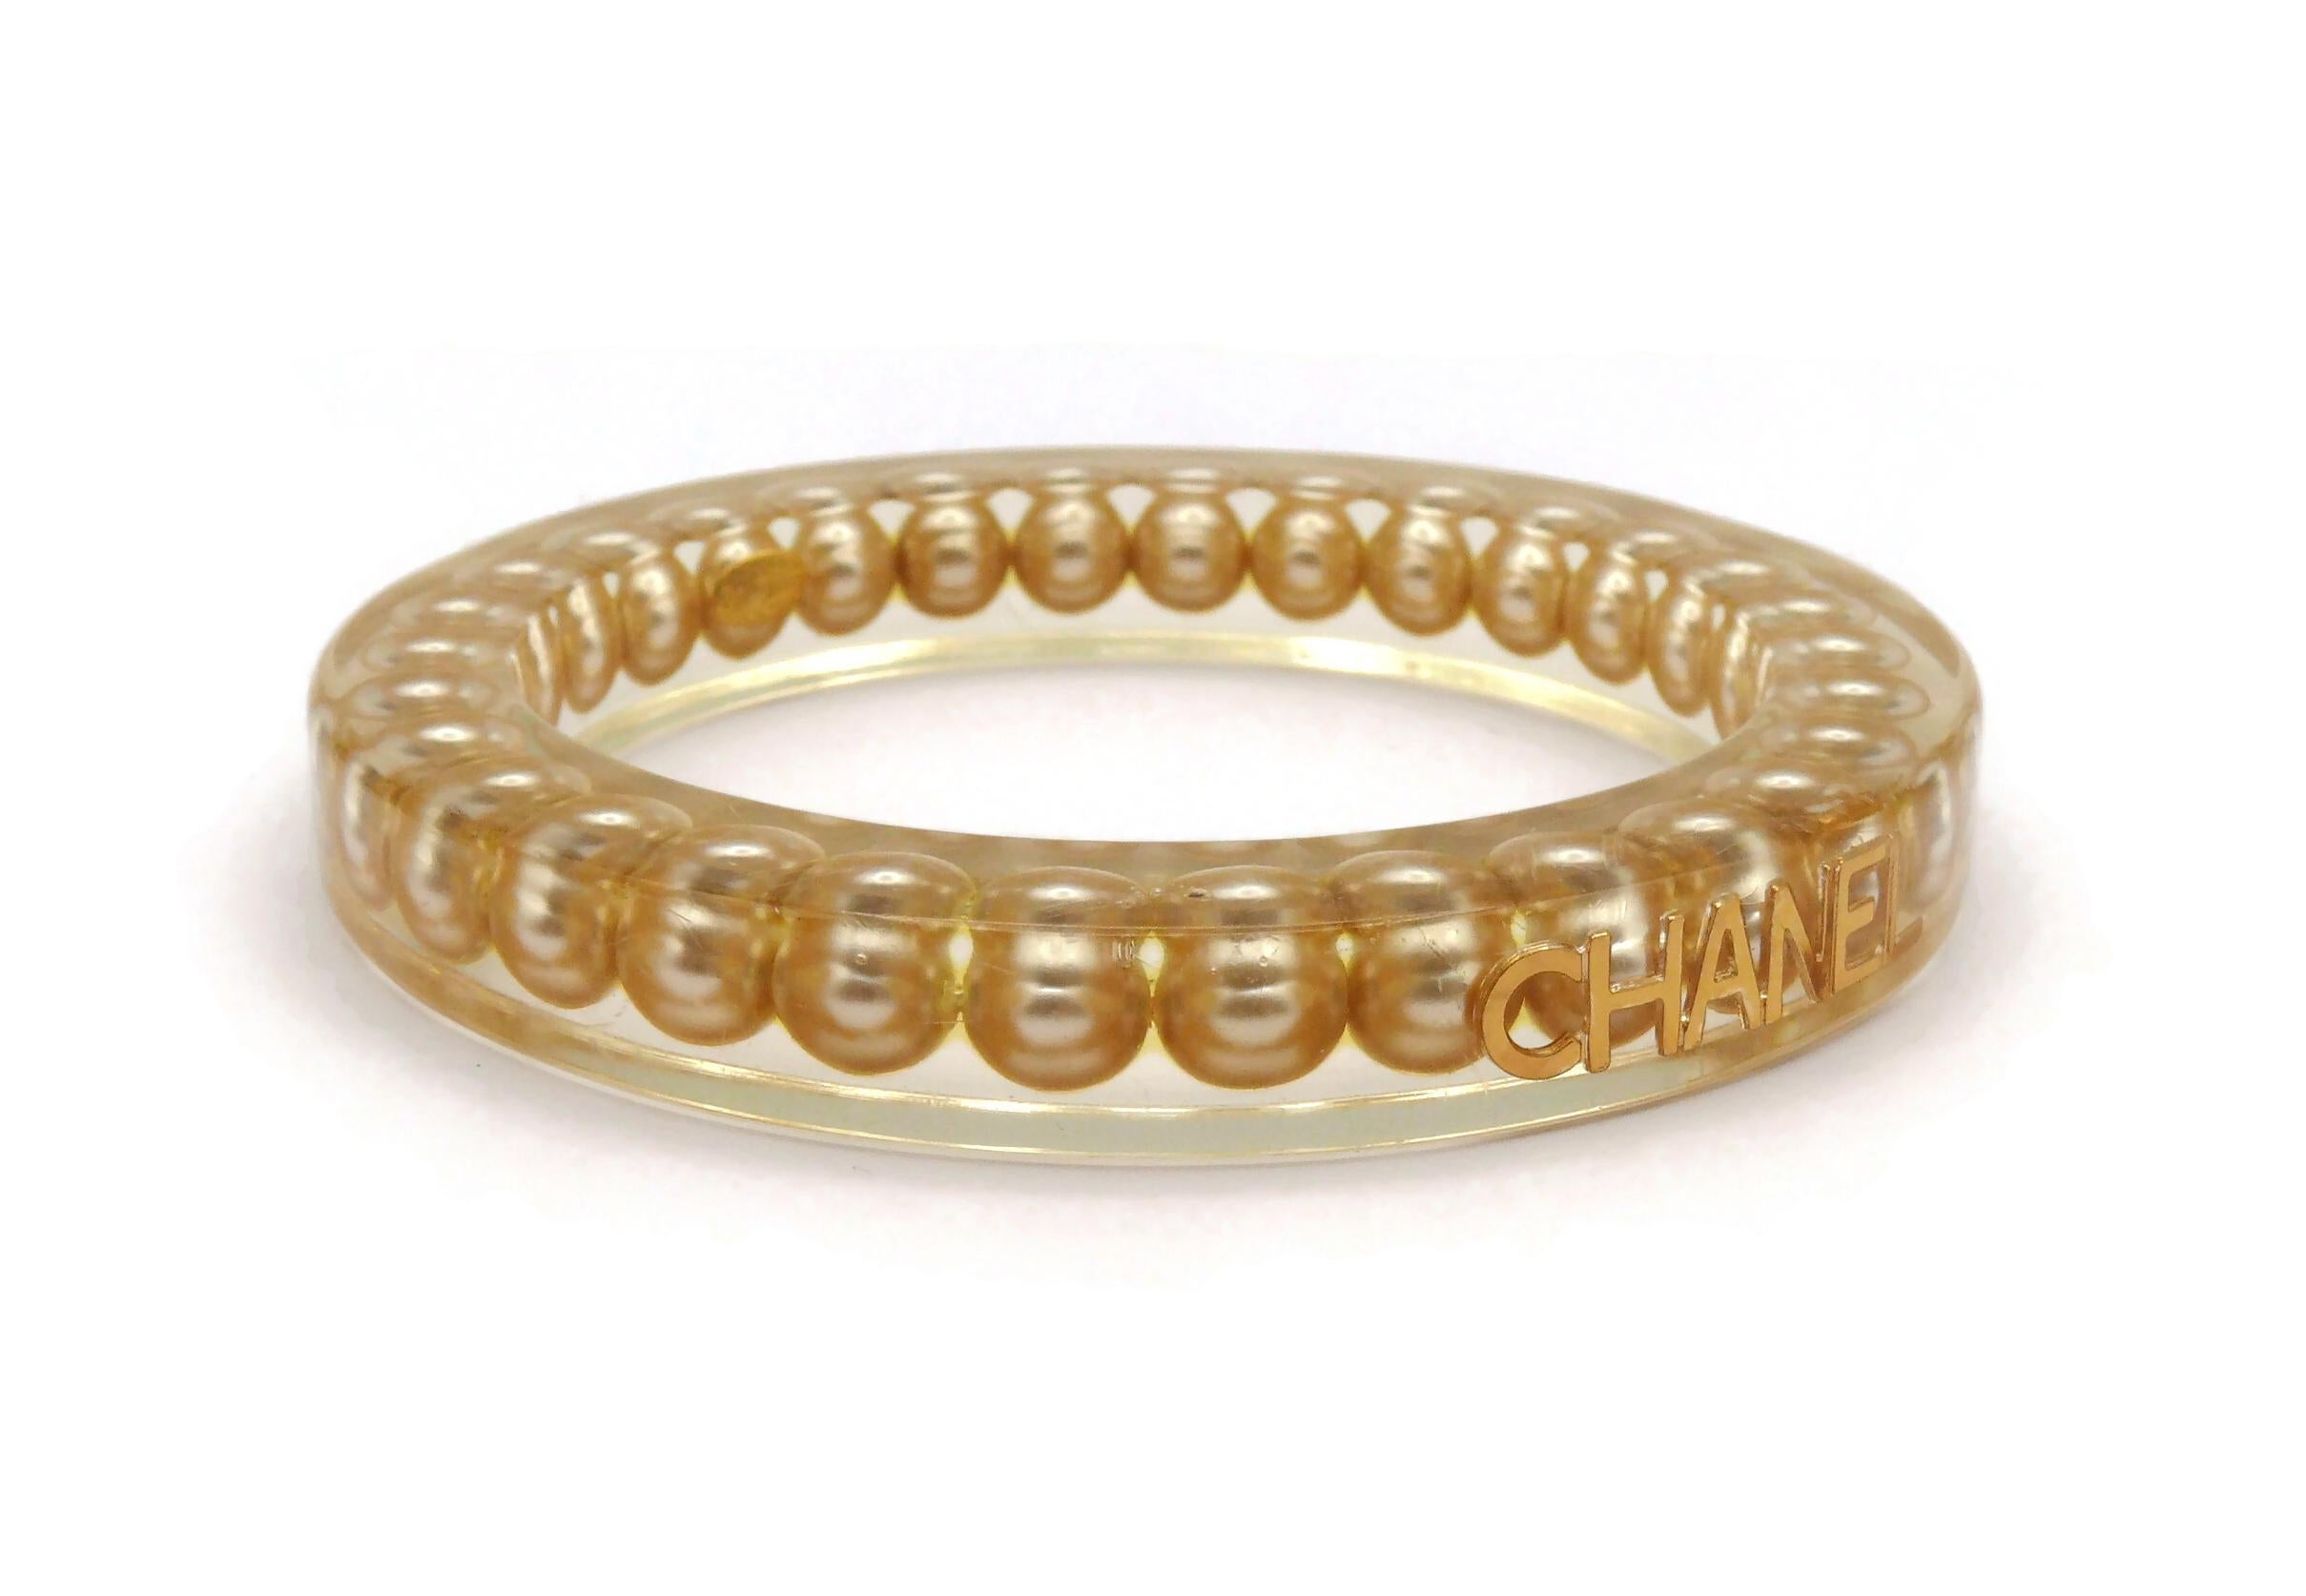 CHANEL by KARL LAGERFELD Vintage Lucite Pearl Inlaid Bangle, Spring 1997 For Sale 5